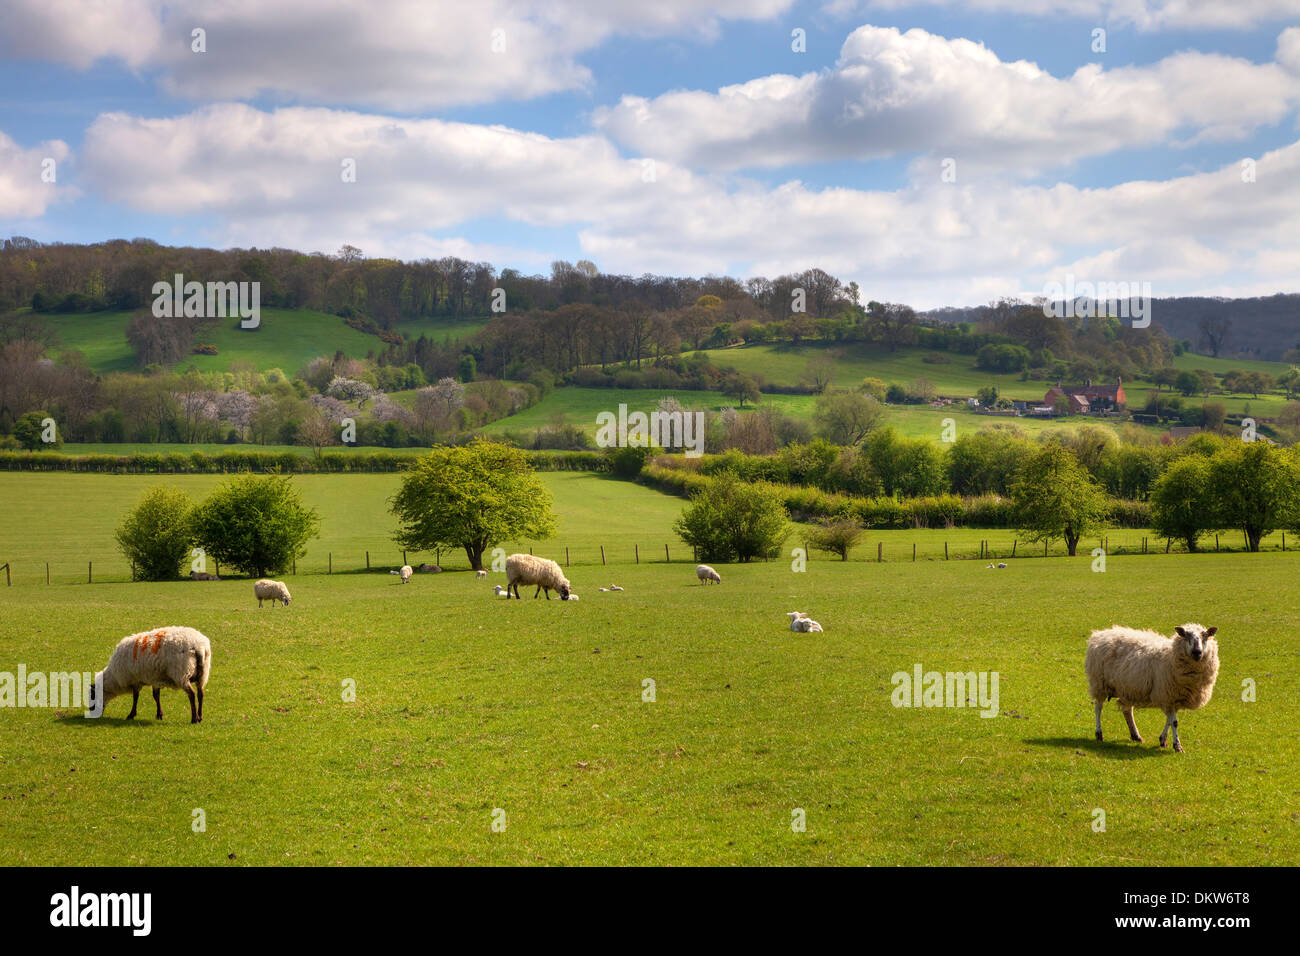 Farmland at lambing time near Weston Subedge, Chipping Campden, Gloucestershire, England. Stock Photo